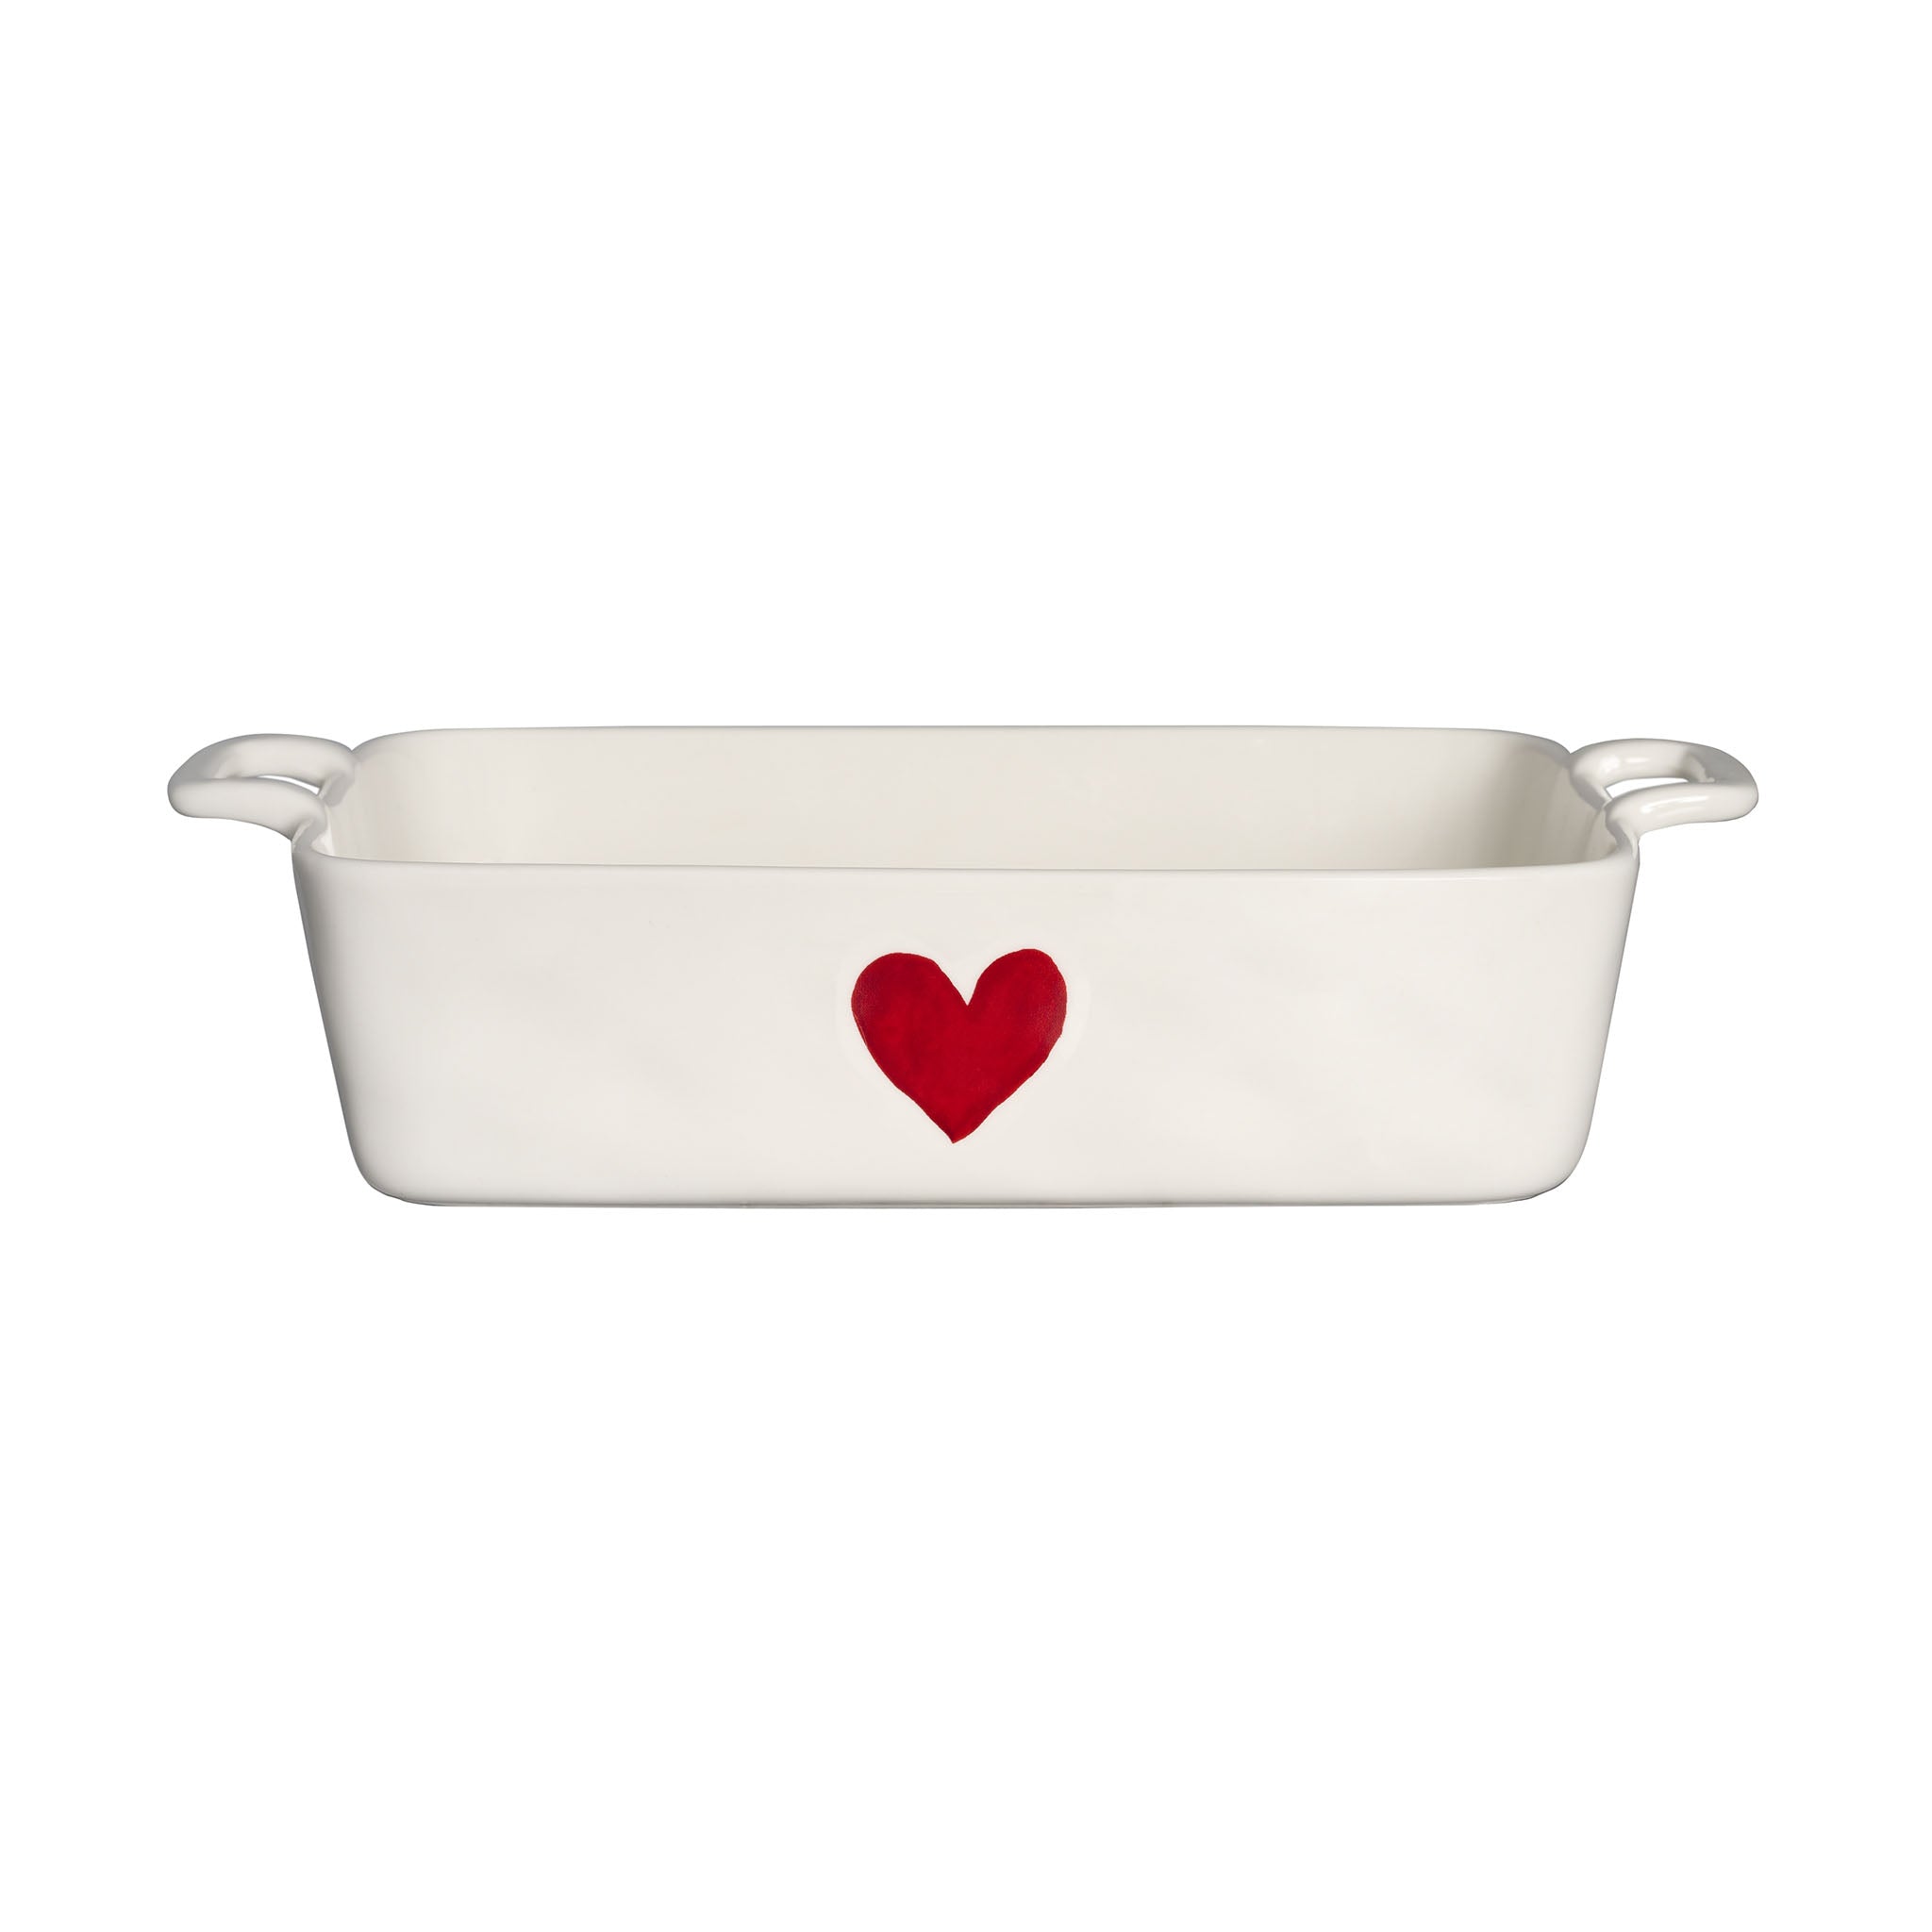 Red Heart Oven Dish